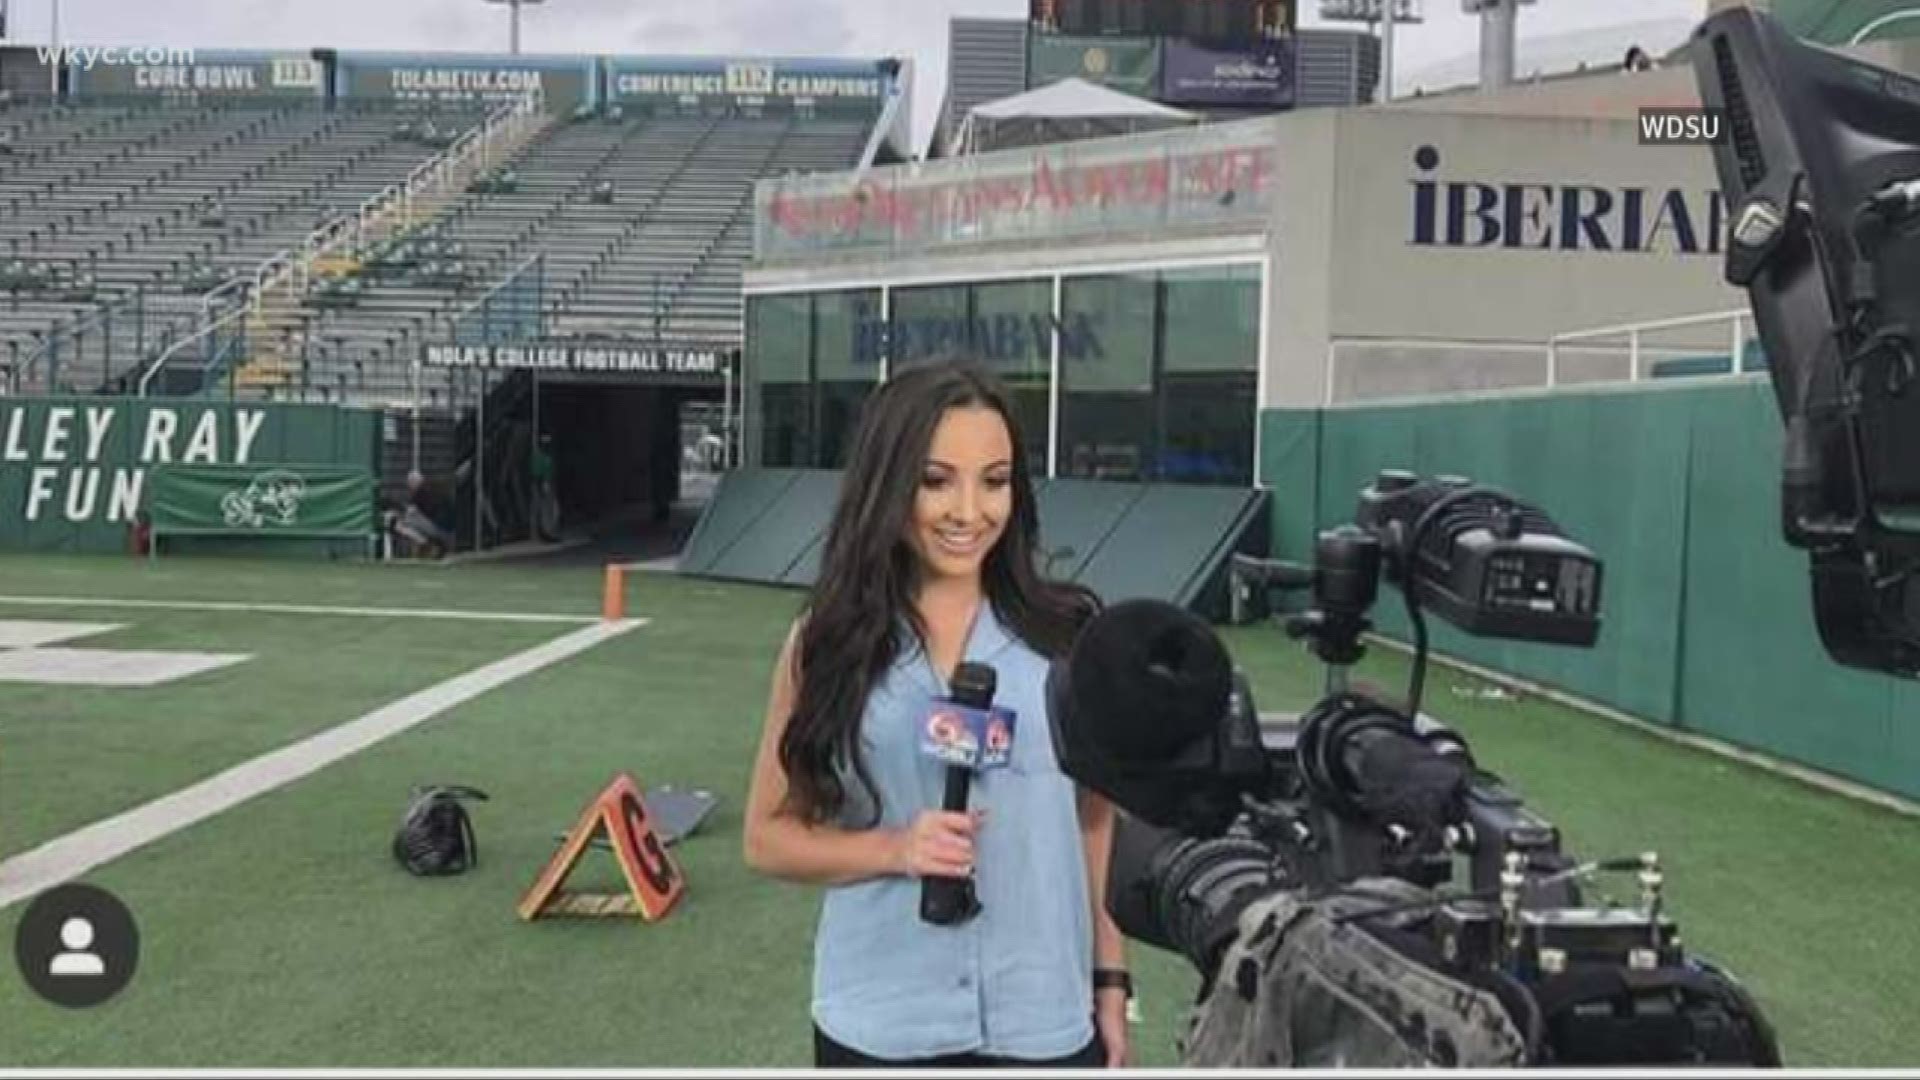 That former q-104 radio host Carley McCord was killed in a plane crash in Louisiana. McCord started her career as an in-house reporter for the Cleveland browns